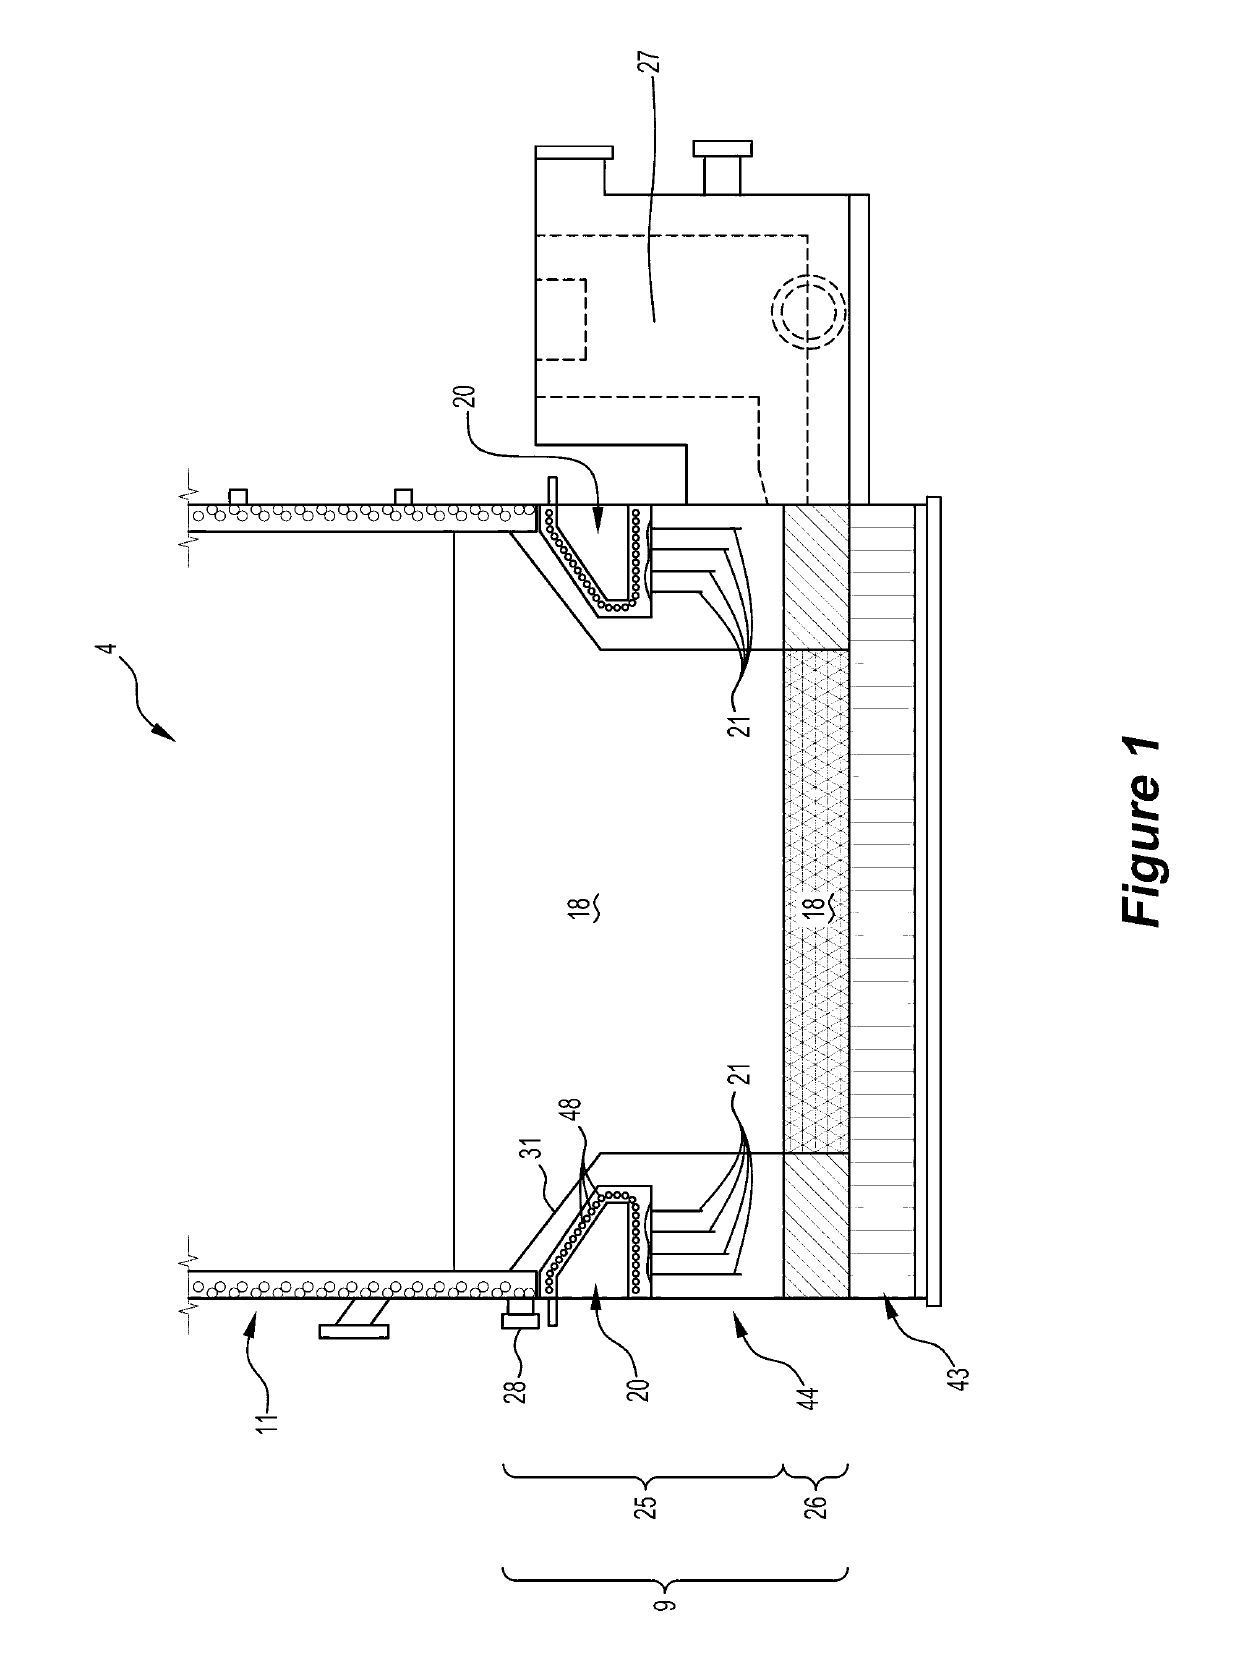 Smelting process and apparatus